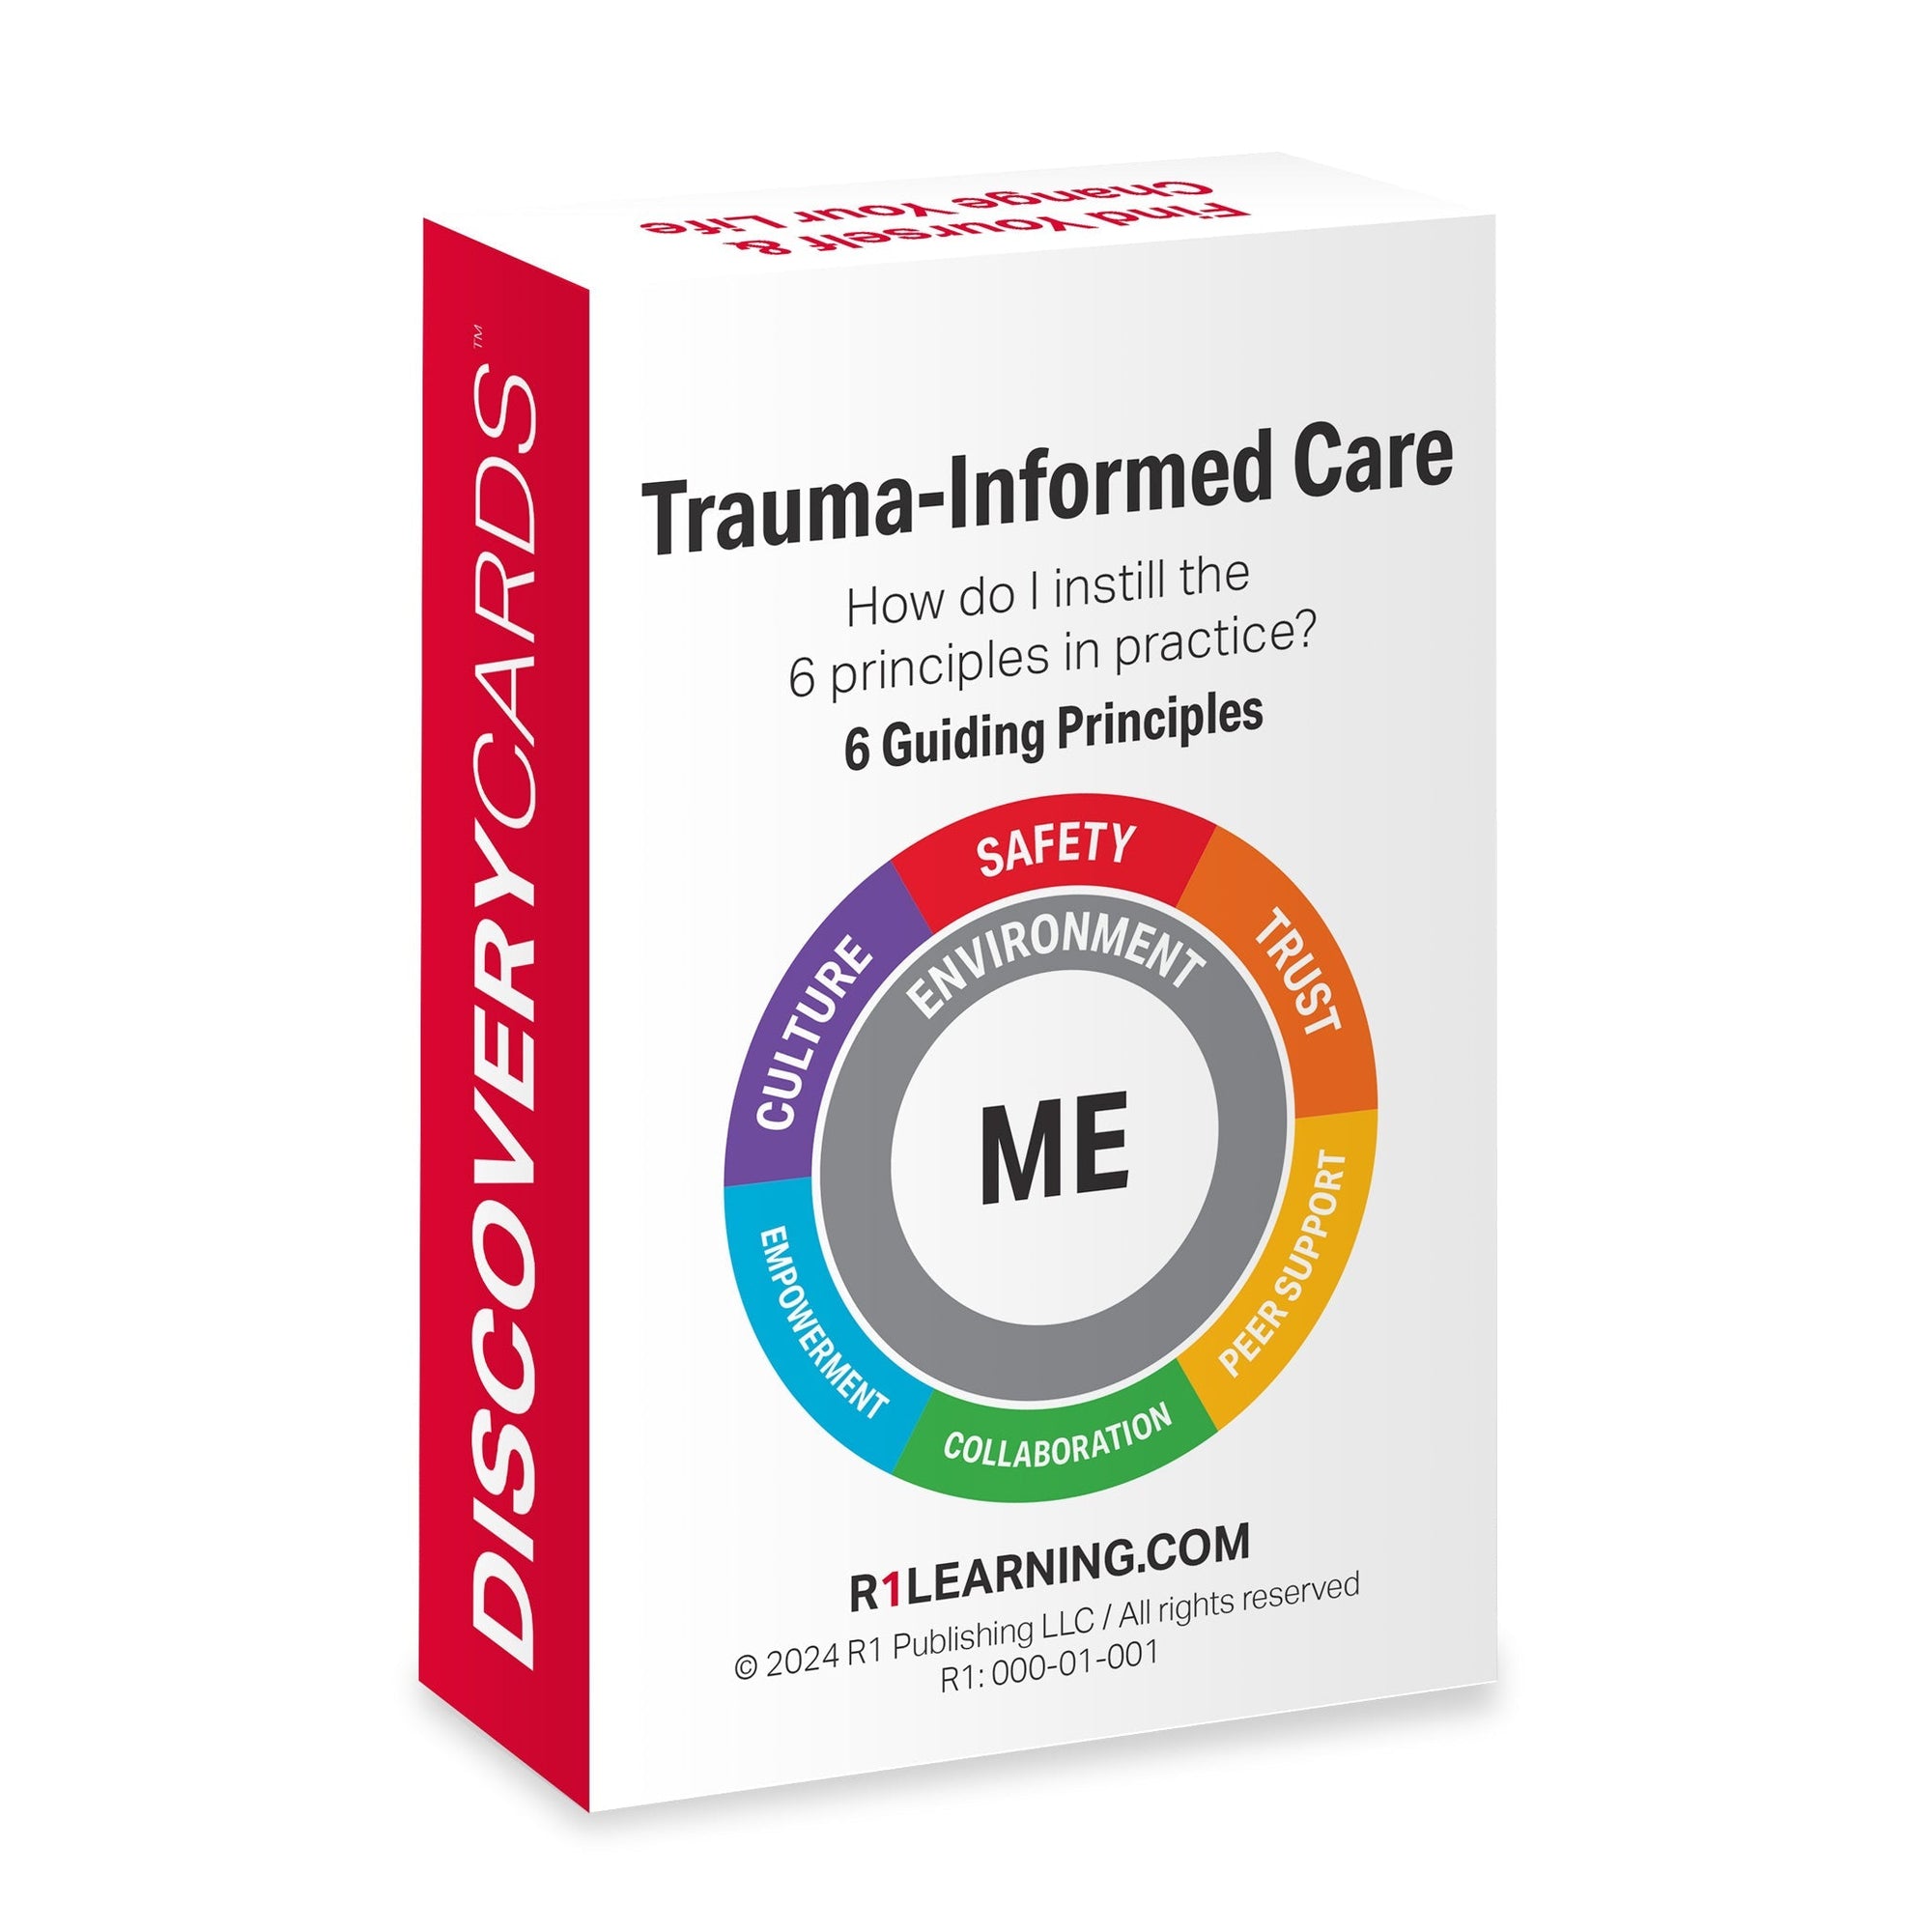 Trauma-Informed Care (ME) Topic Kit — 1 deck, for Practitioners and Staff